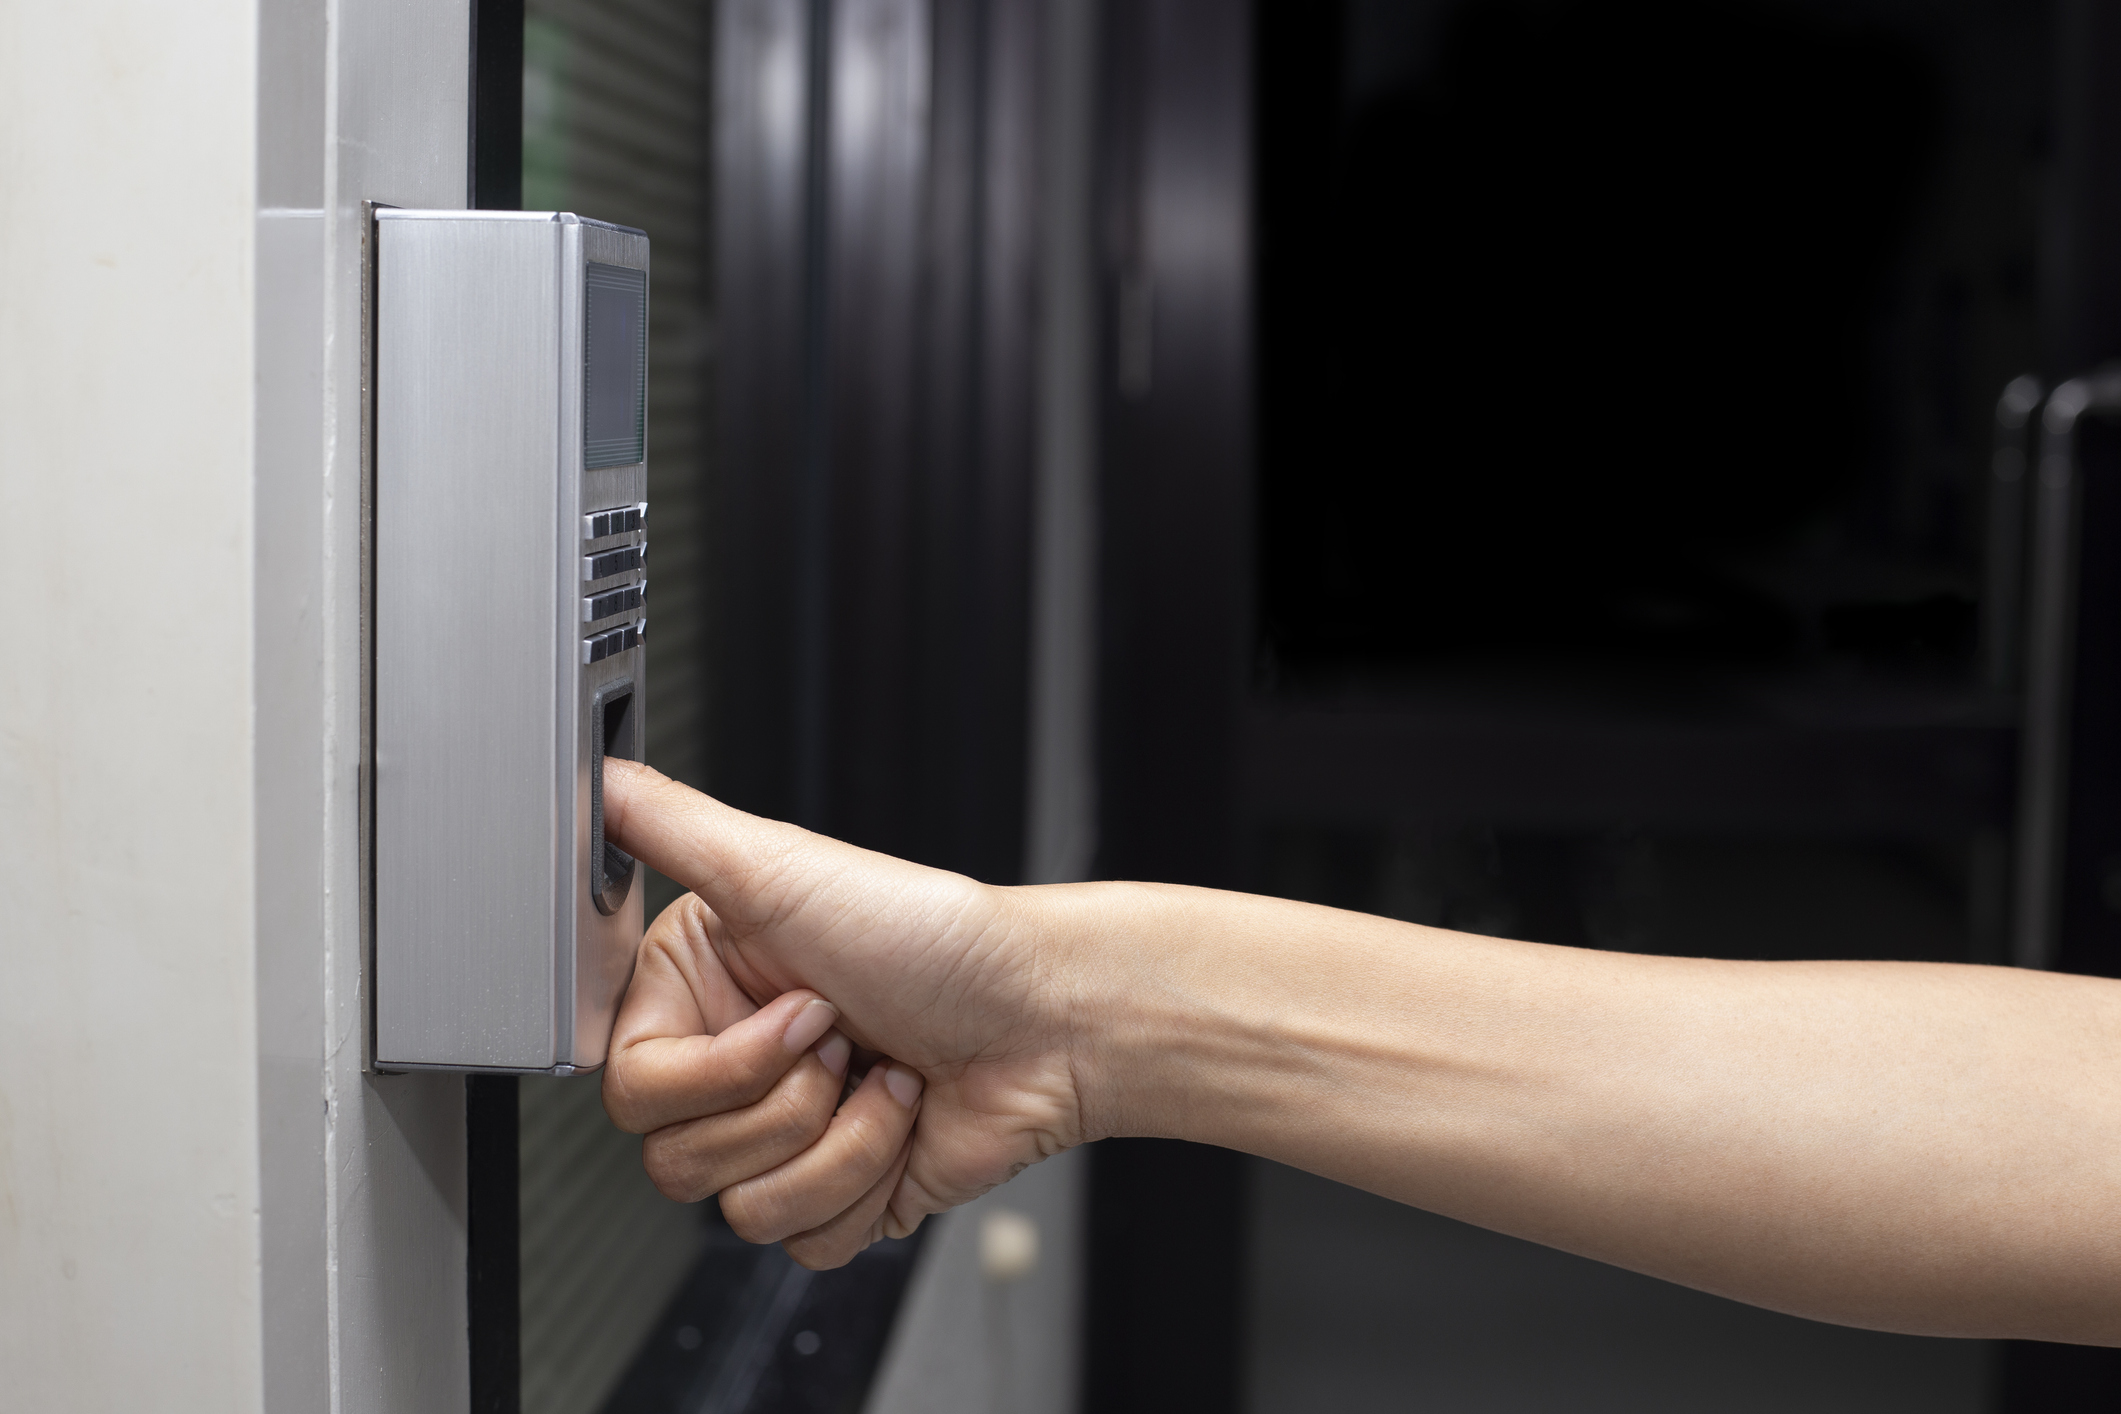 fingerprint and access control in a self storage building